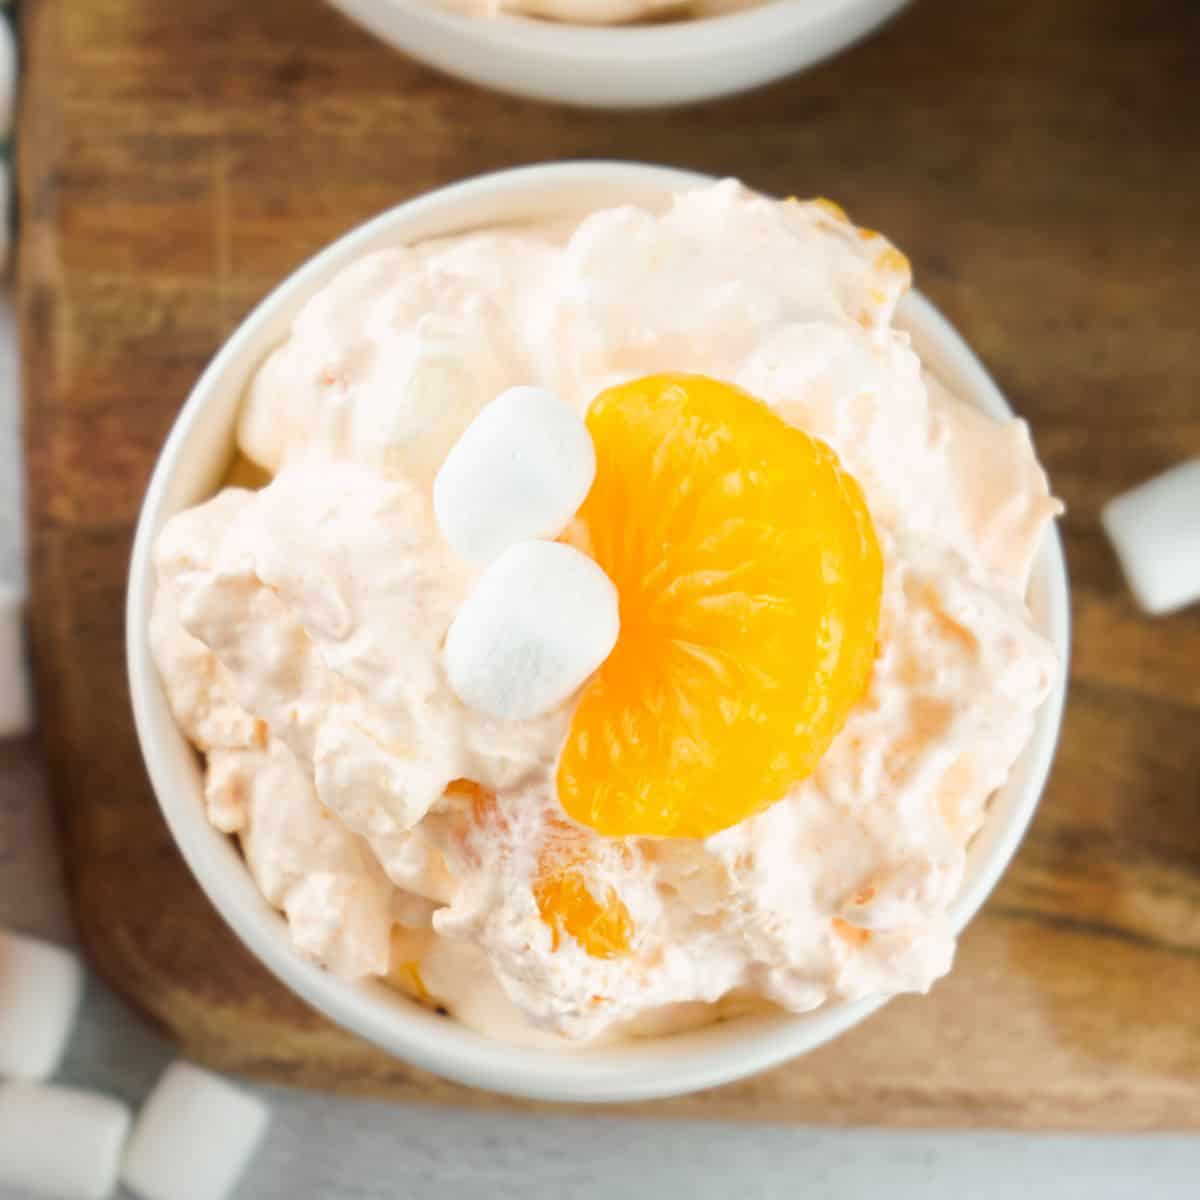 Orange fluff salad in a bowl with a slice of mandarin orange and marshmallows on top for garnish.